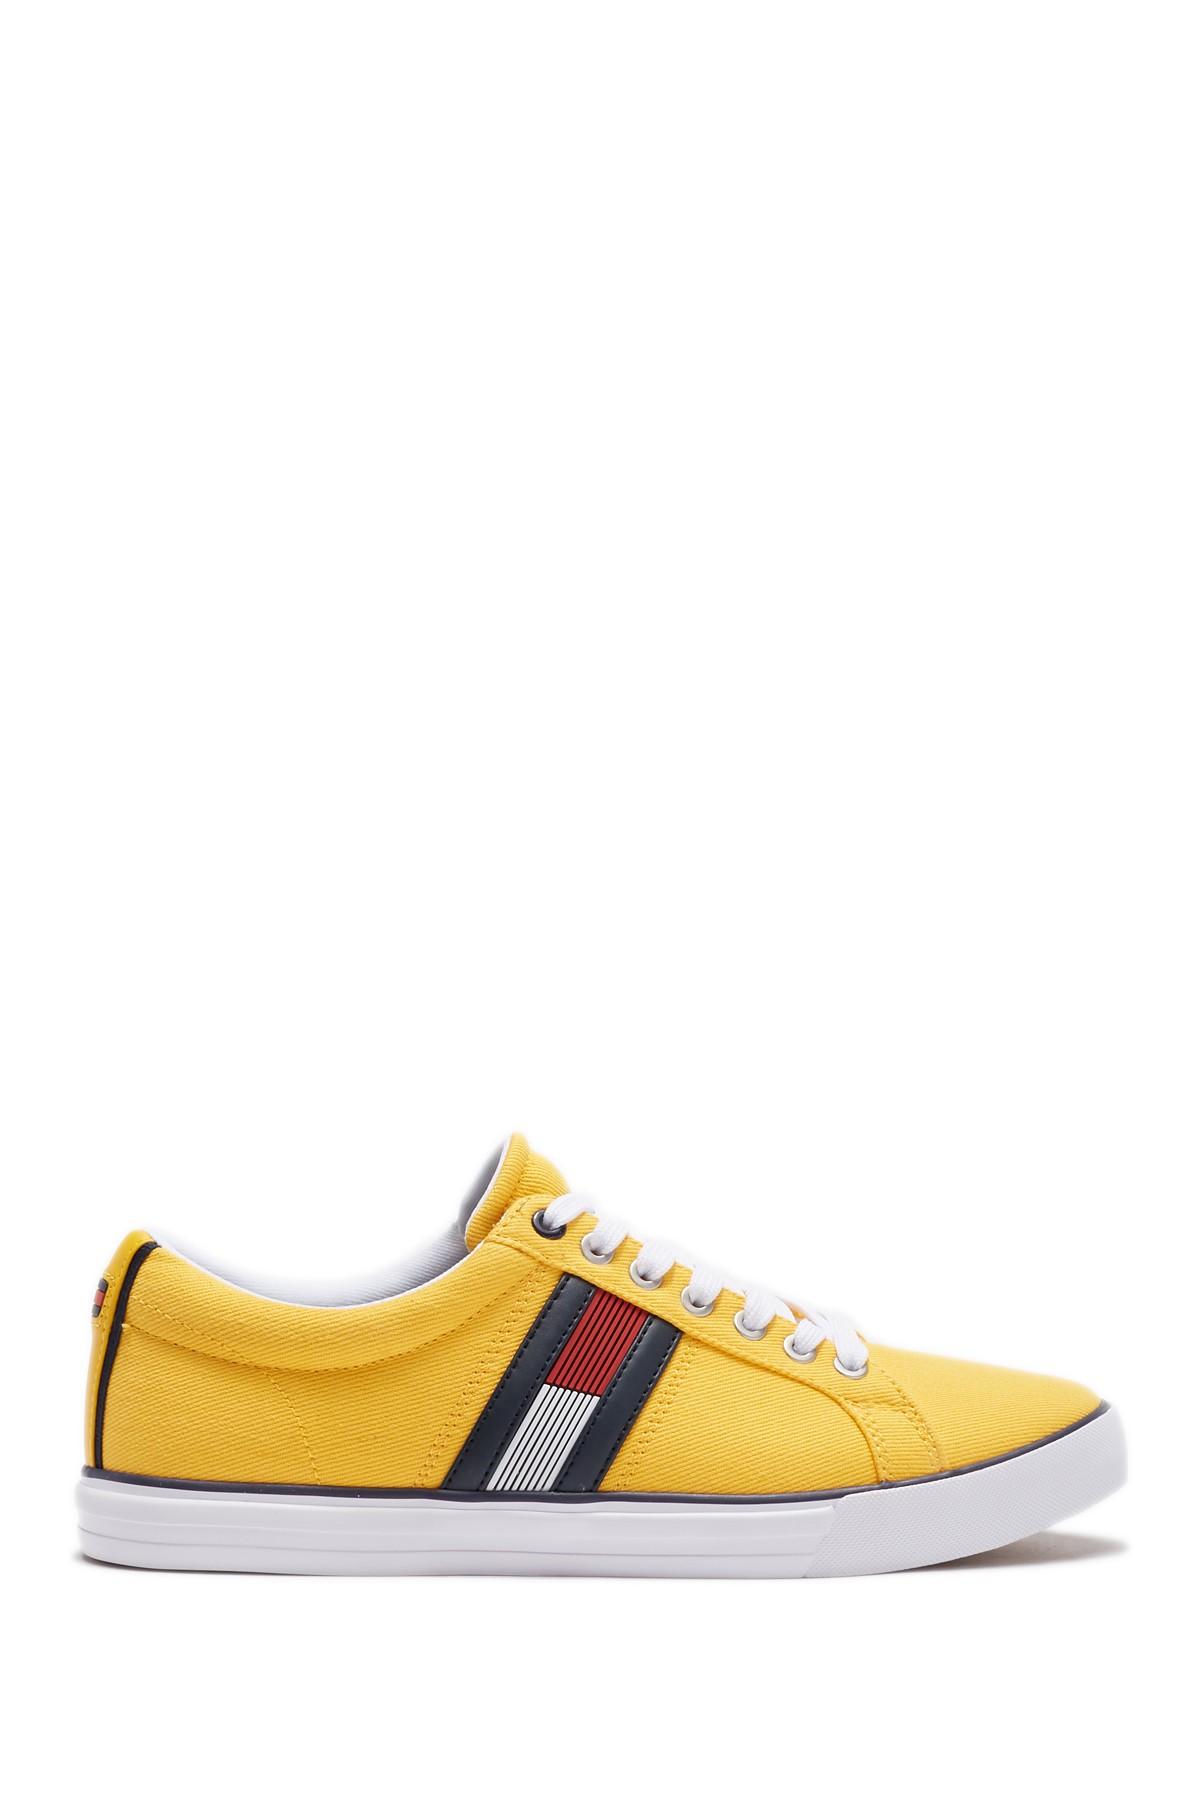 Tommy Hilfiger Remi Canvas Sneaker for 